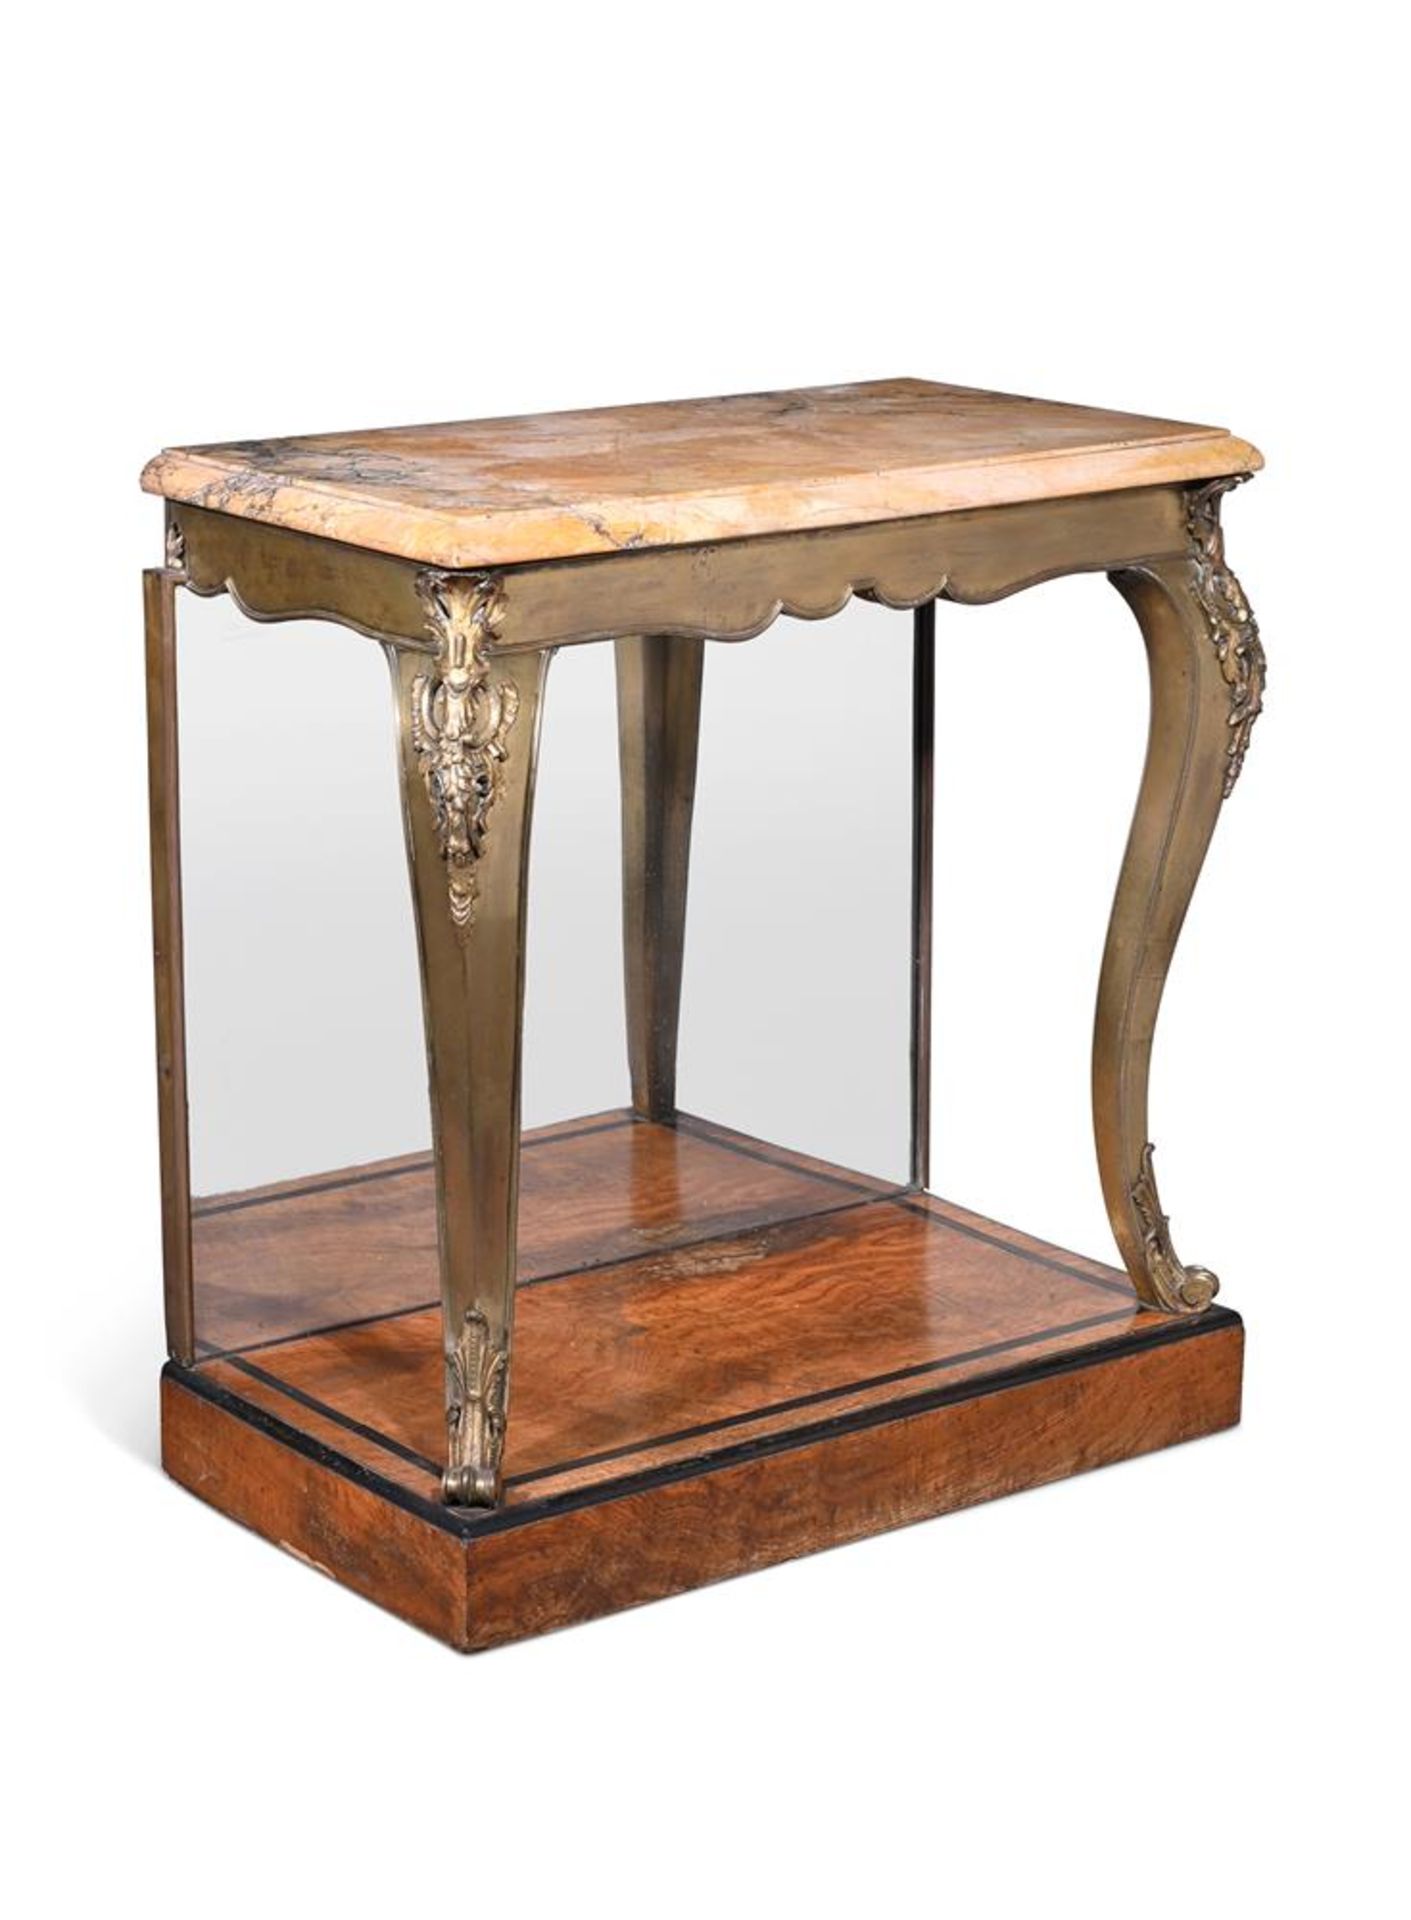 Y A GEORGE IV GILT BRASS POLLARD OAK AND MARBLE MOUNTED CONSOLE TABLE, CIRCA 1825T